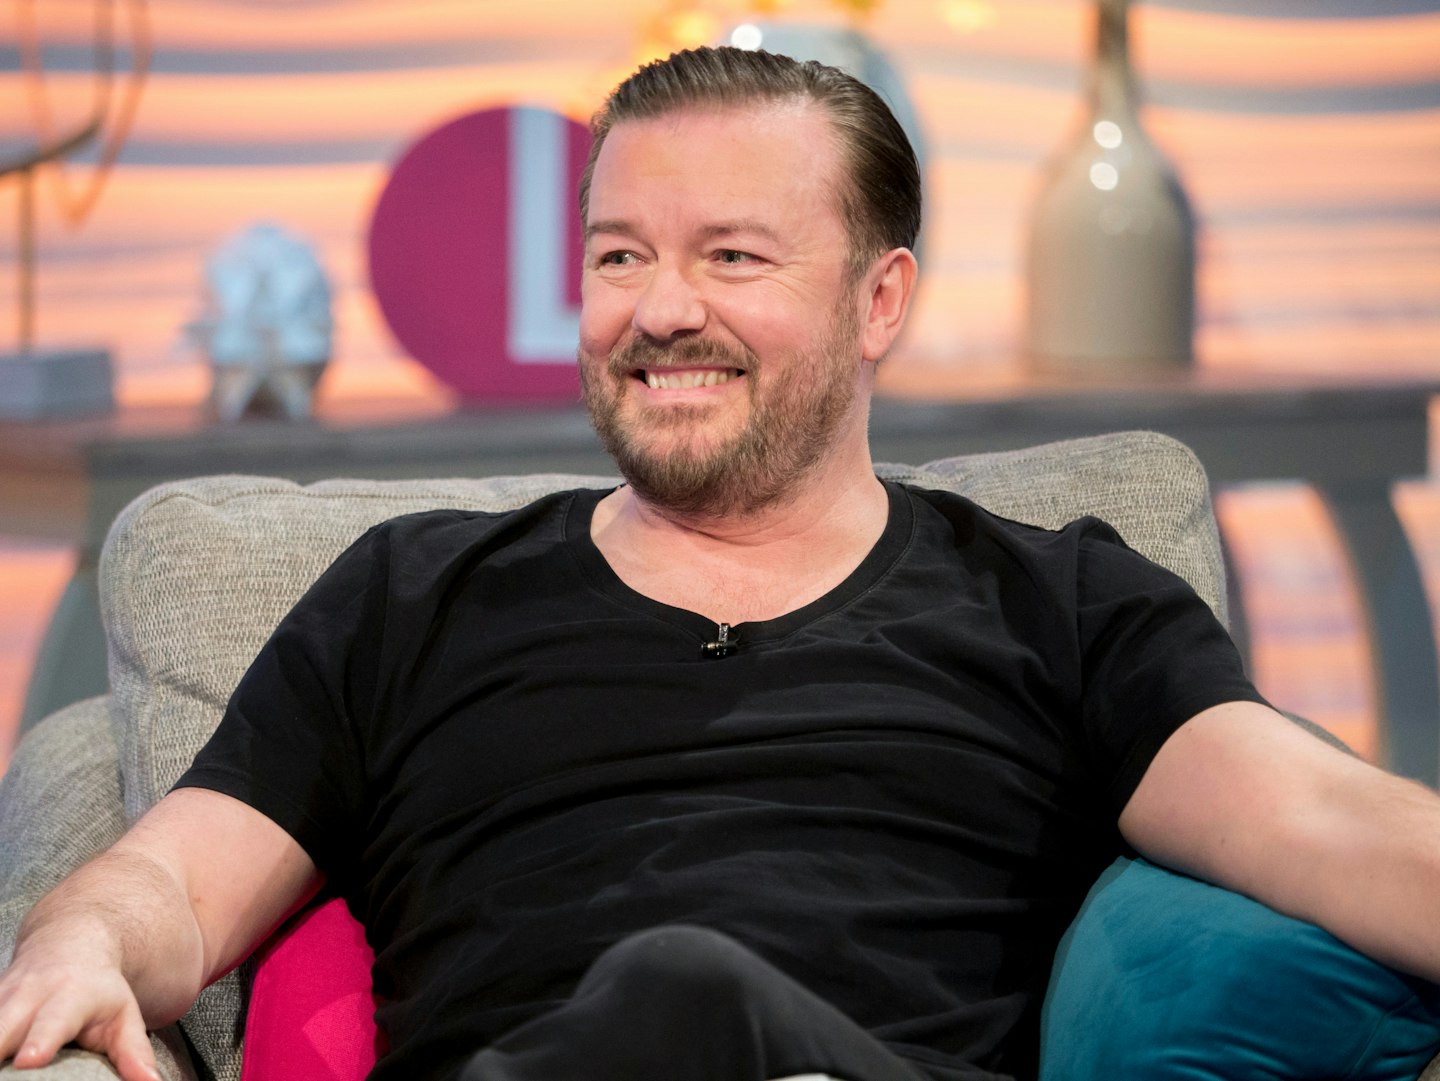 Ricky Gervais (David Brent) now